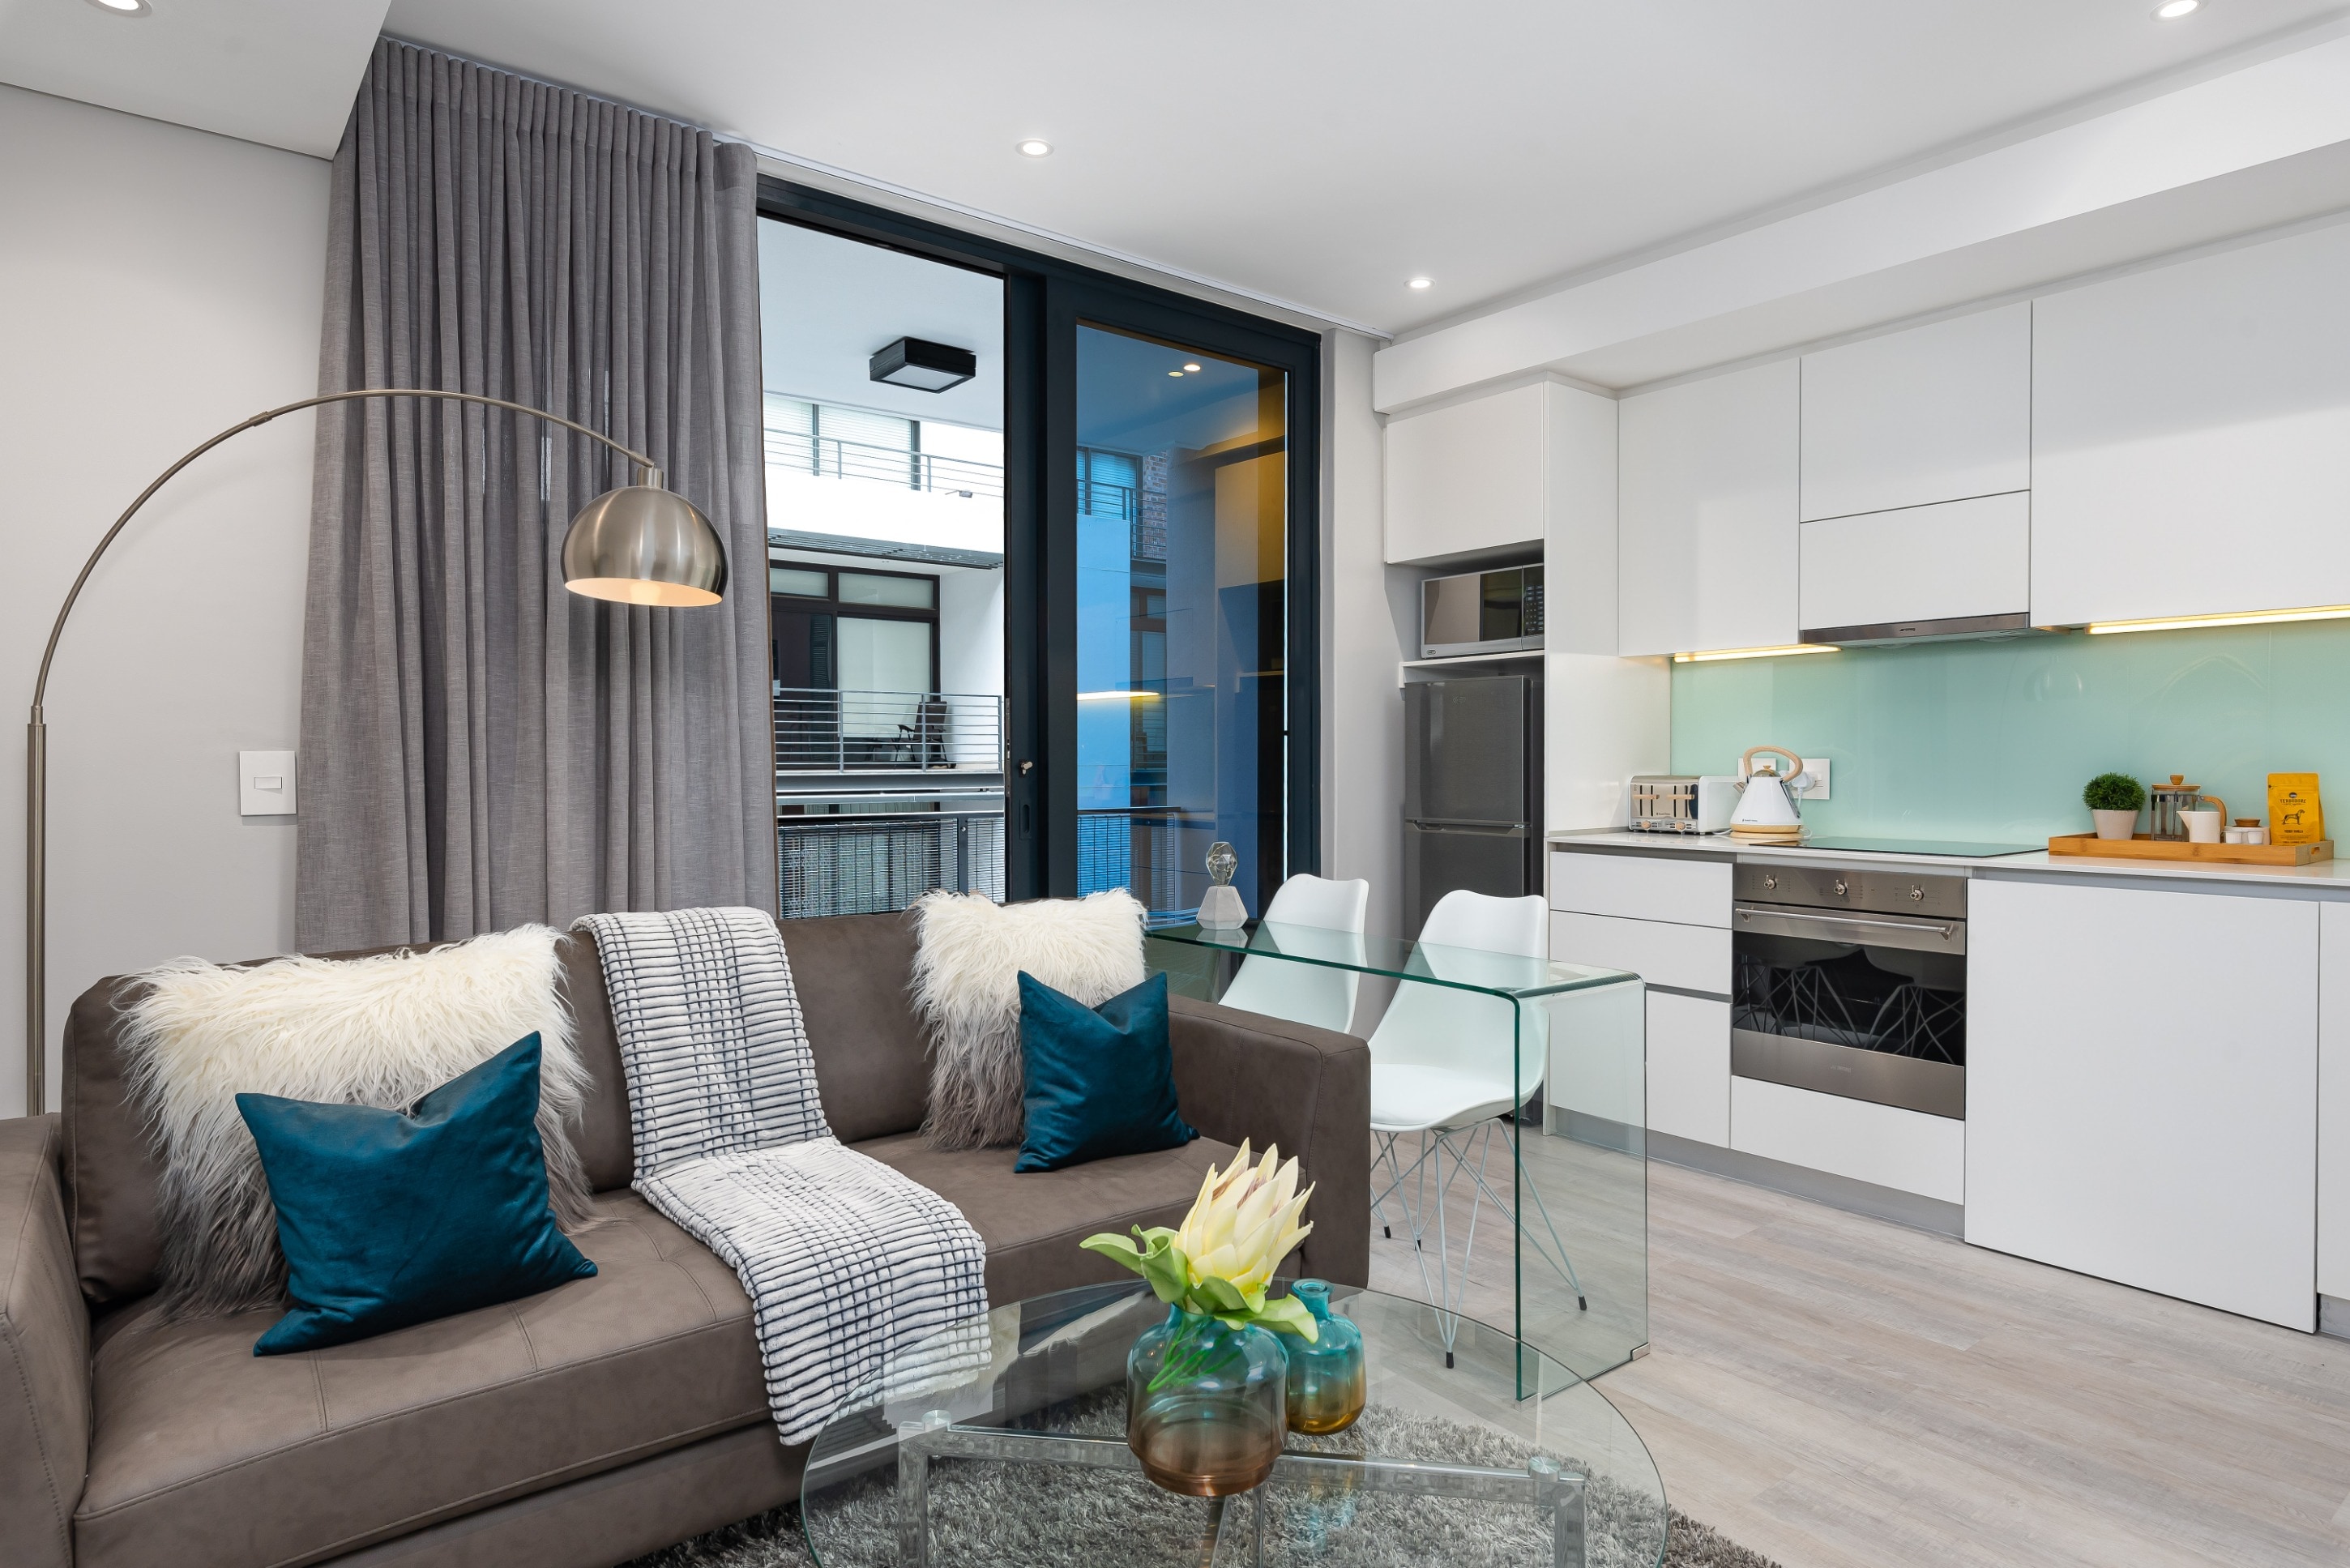 Property Image 1 - Trendy Fresh Apartment close to V&A Waterfront